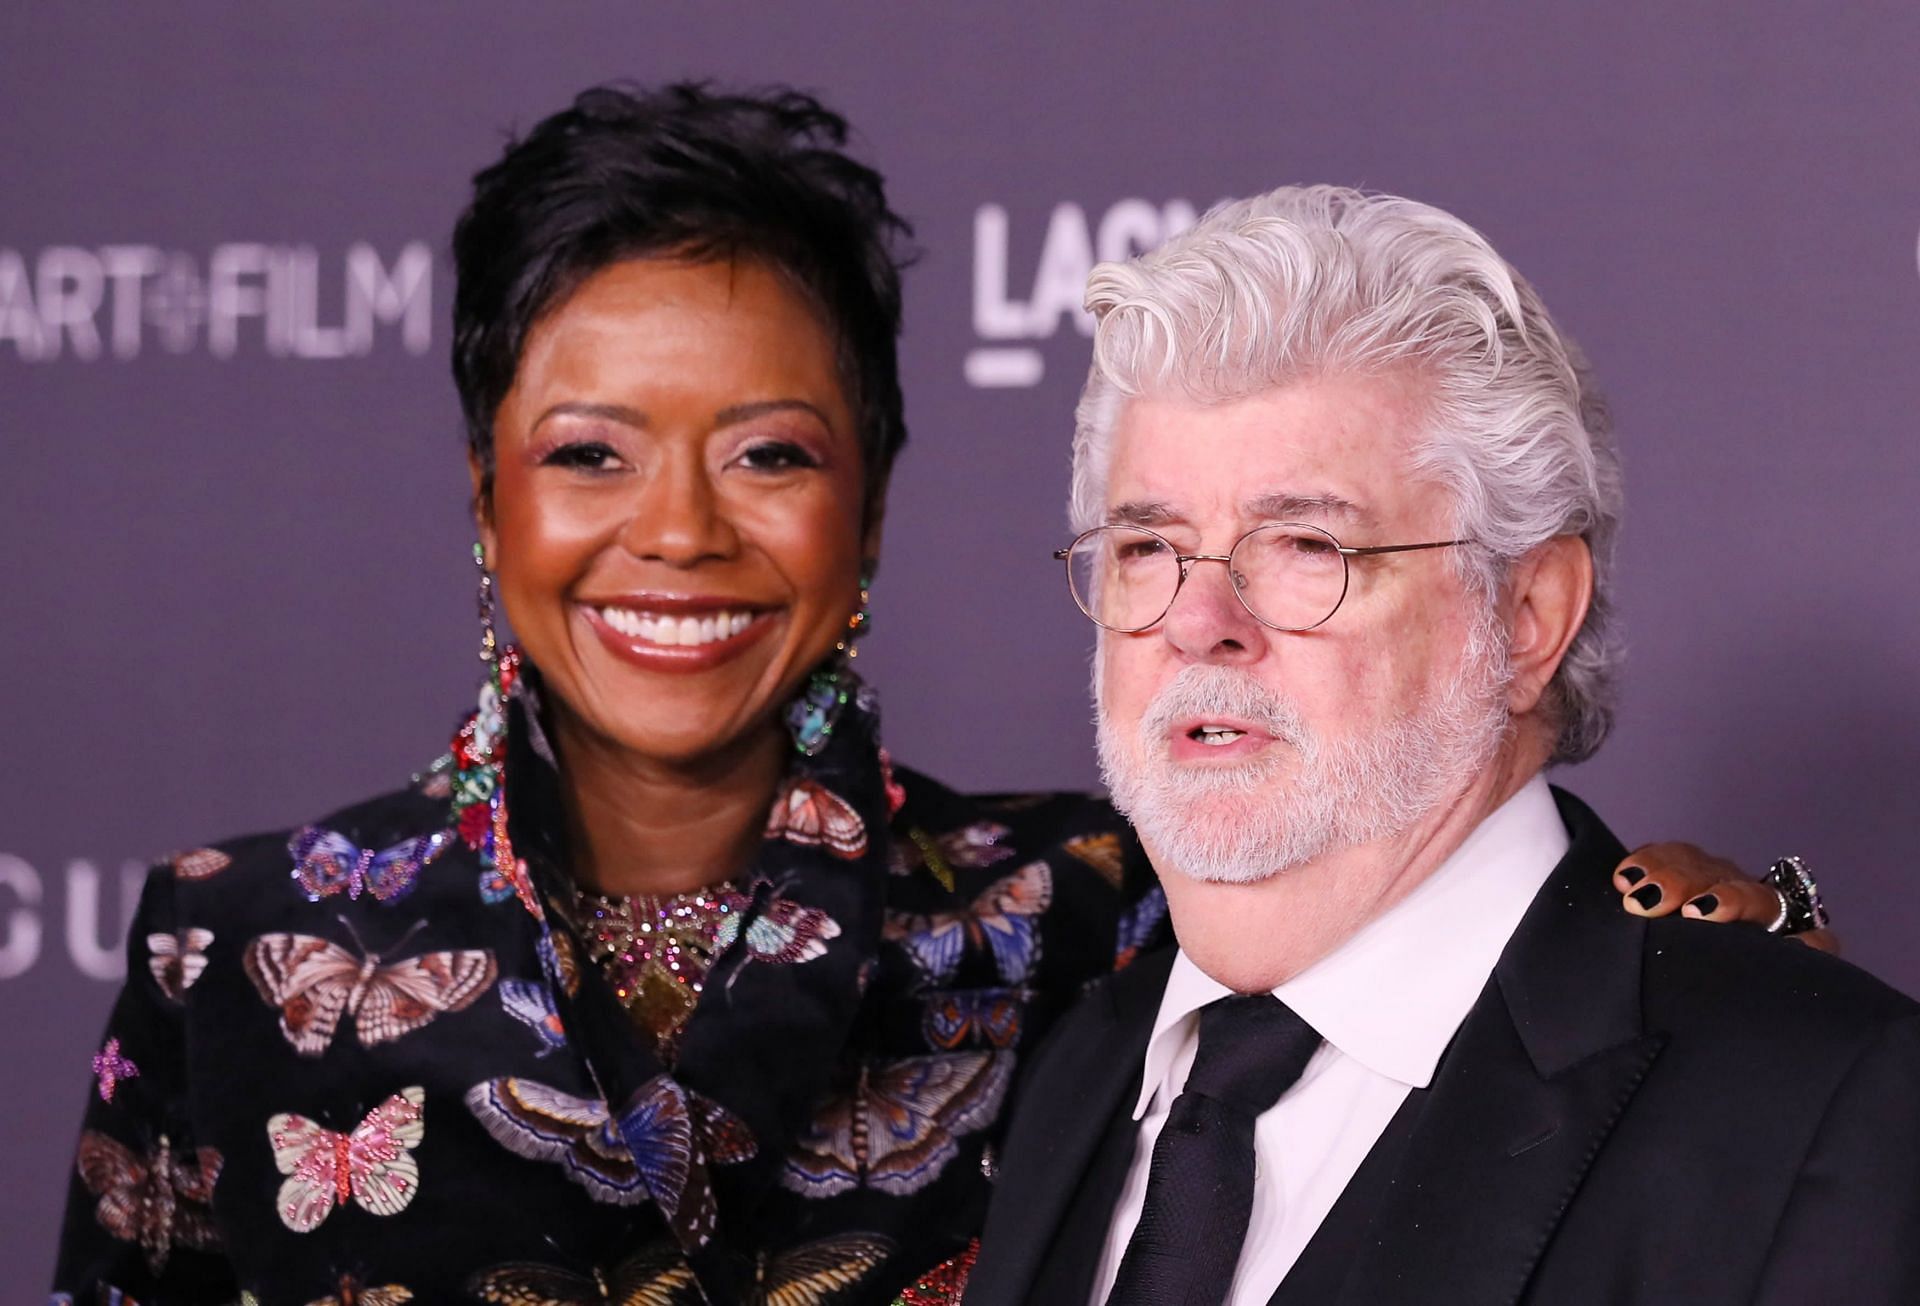 The Broncos co-woner with her husband, Star Wars creator George Lucas. Source: CNBC